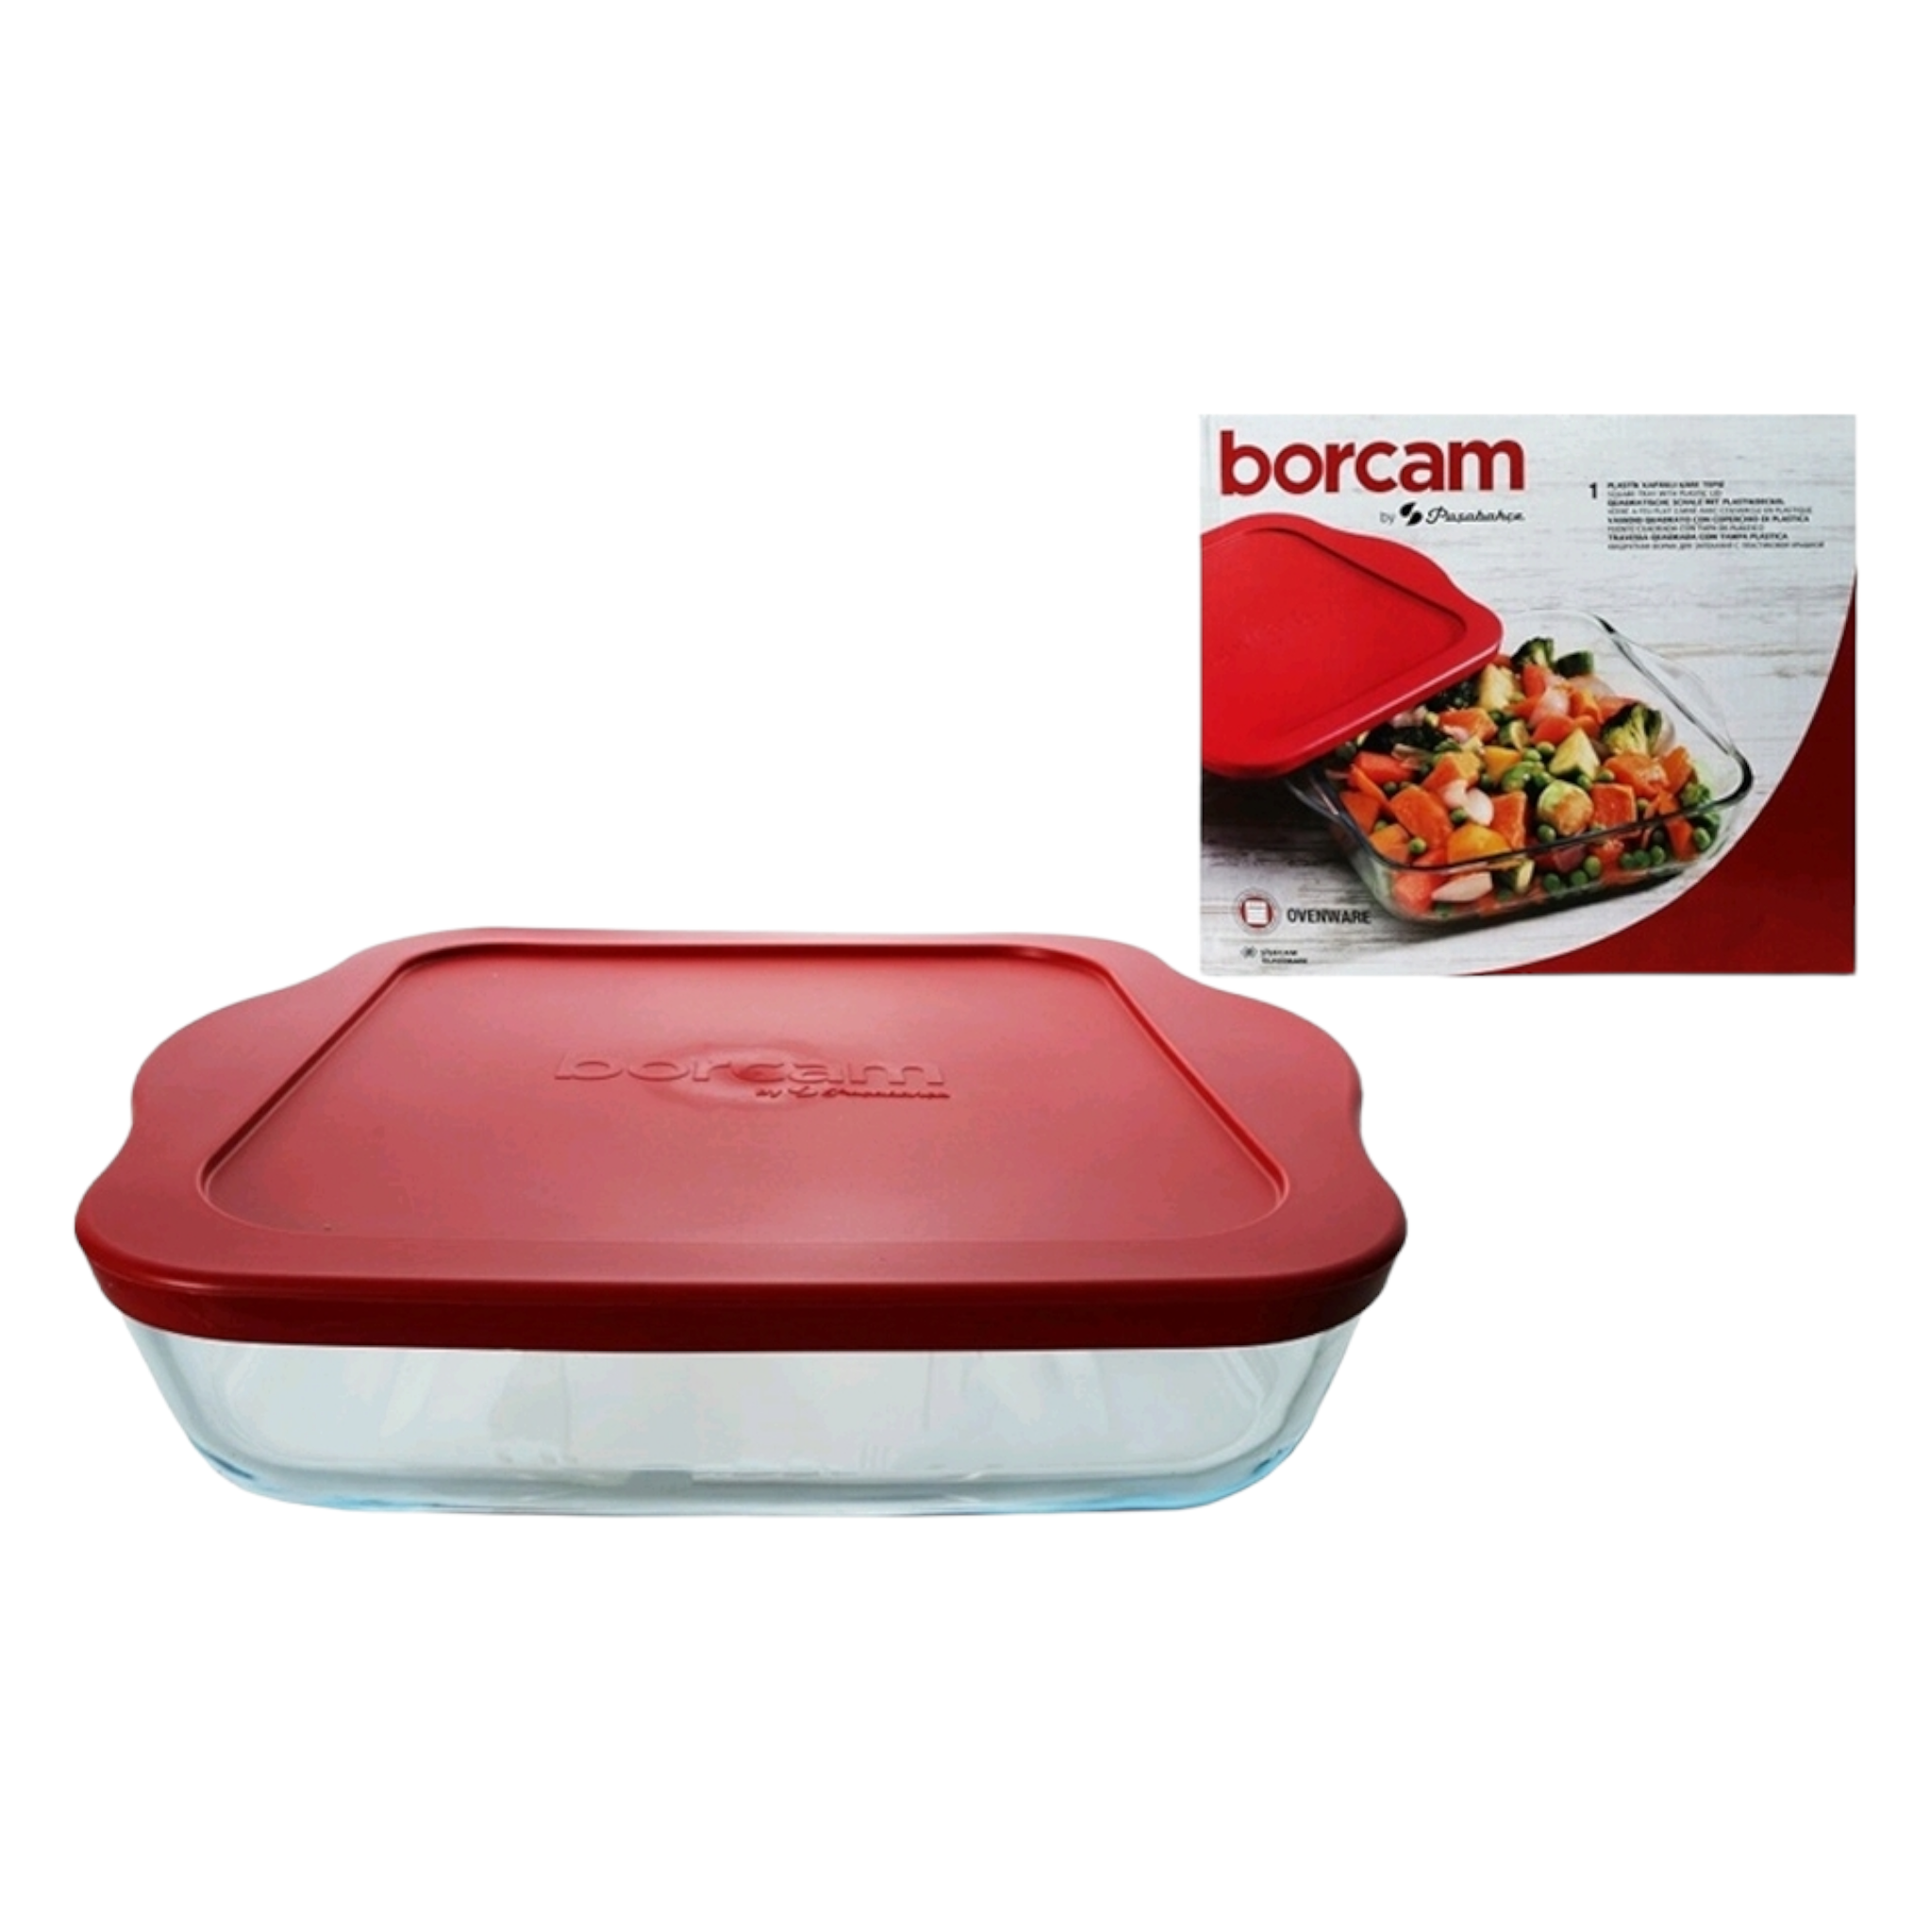 Borcam Glass Serving Dish Roaster Square and Cover 25.6x22x6cm 23797